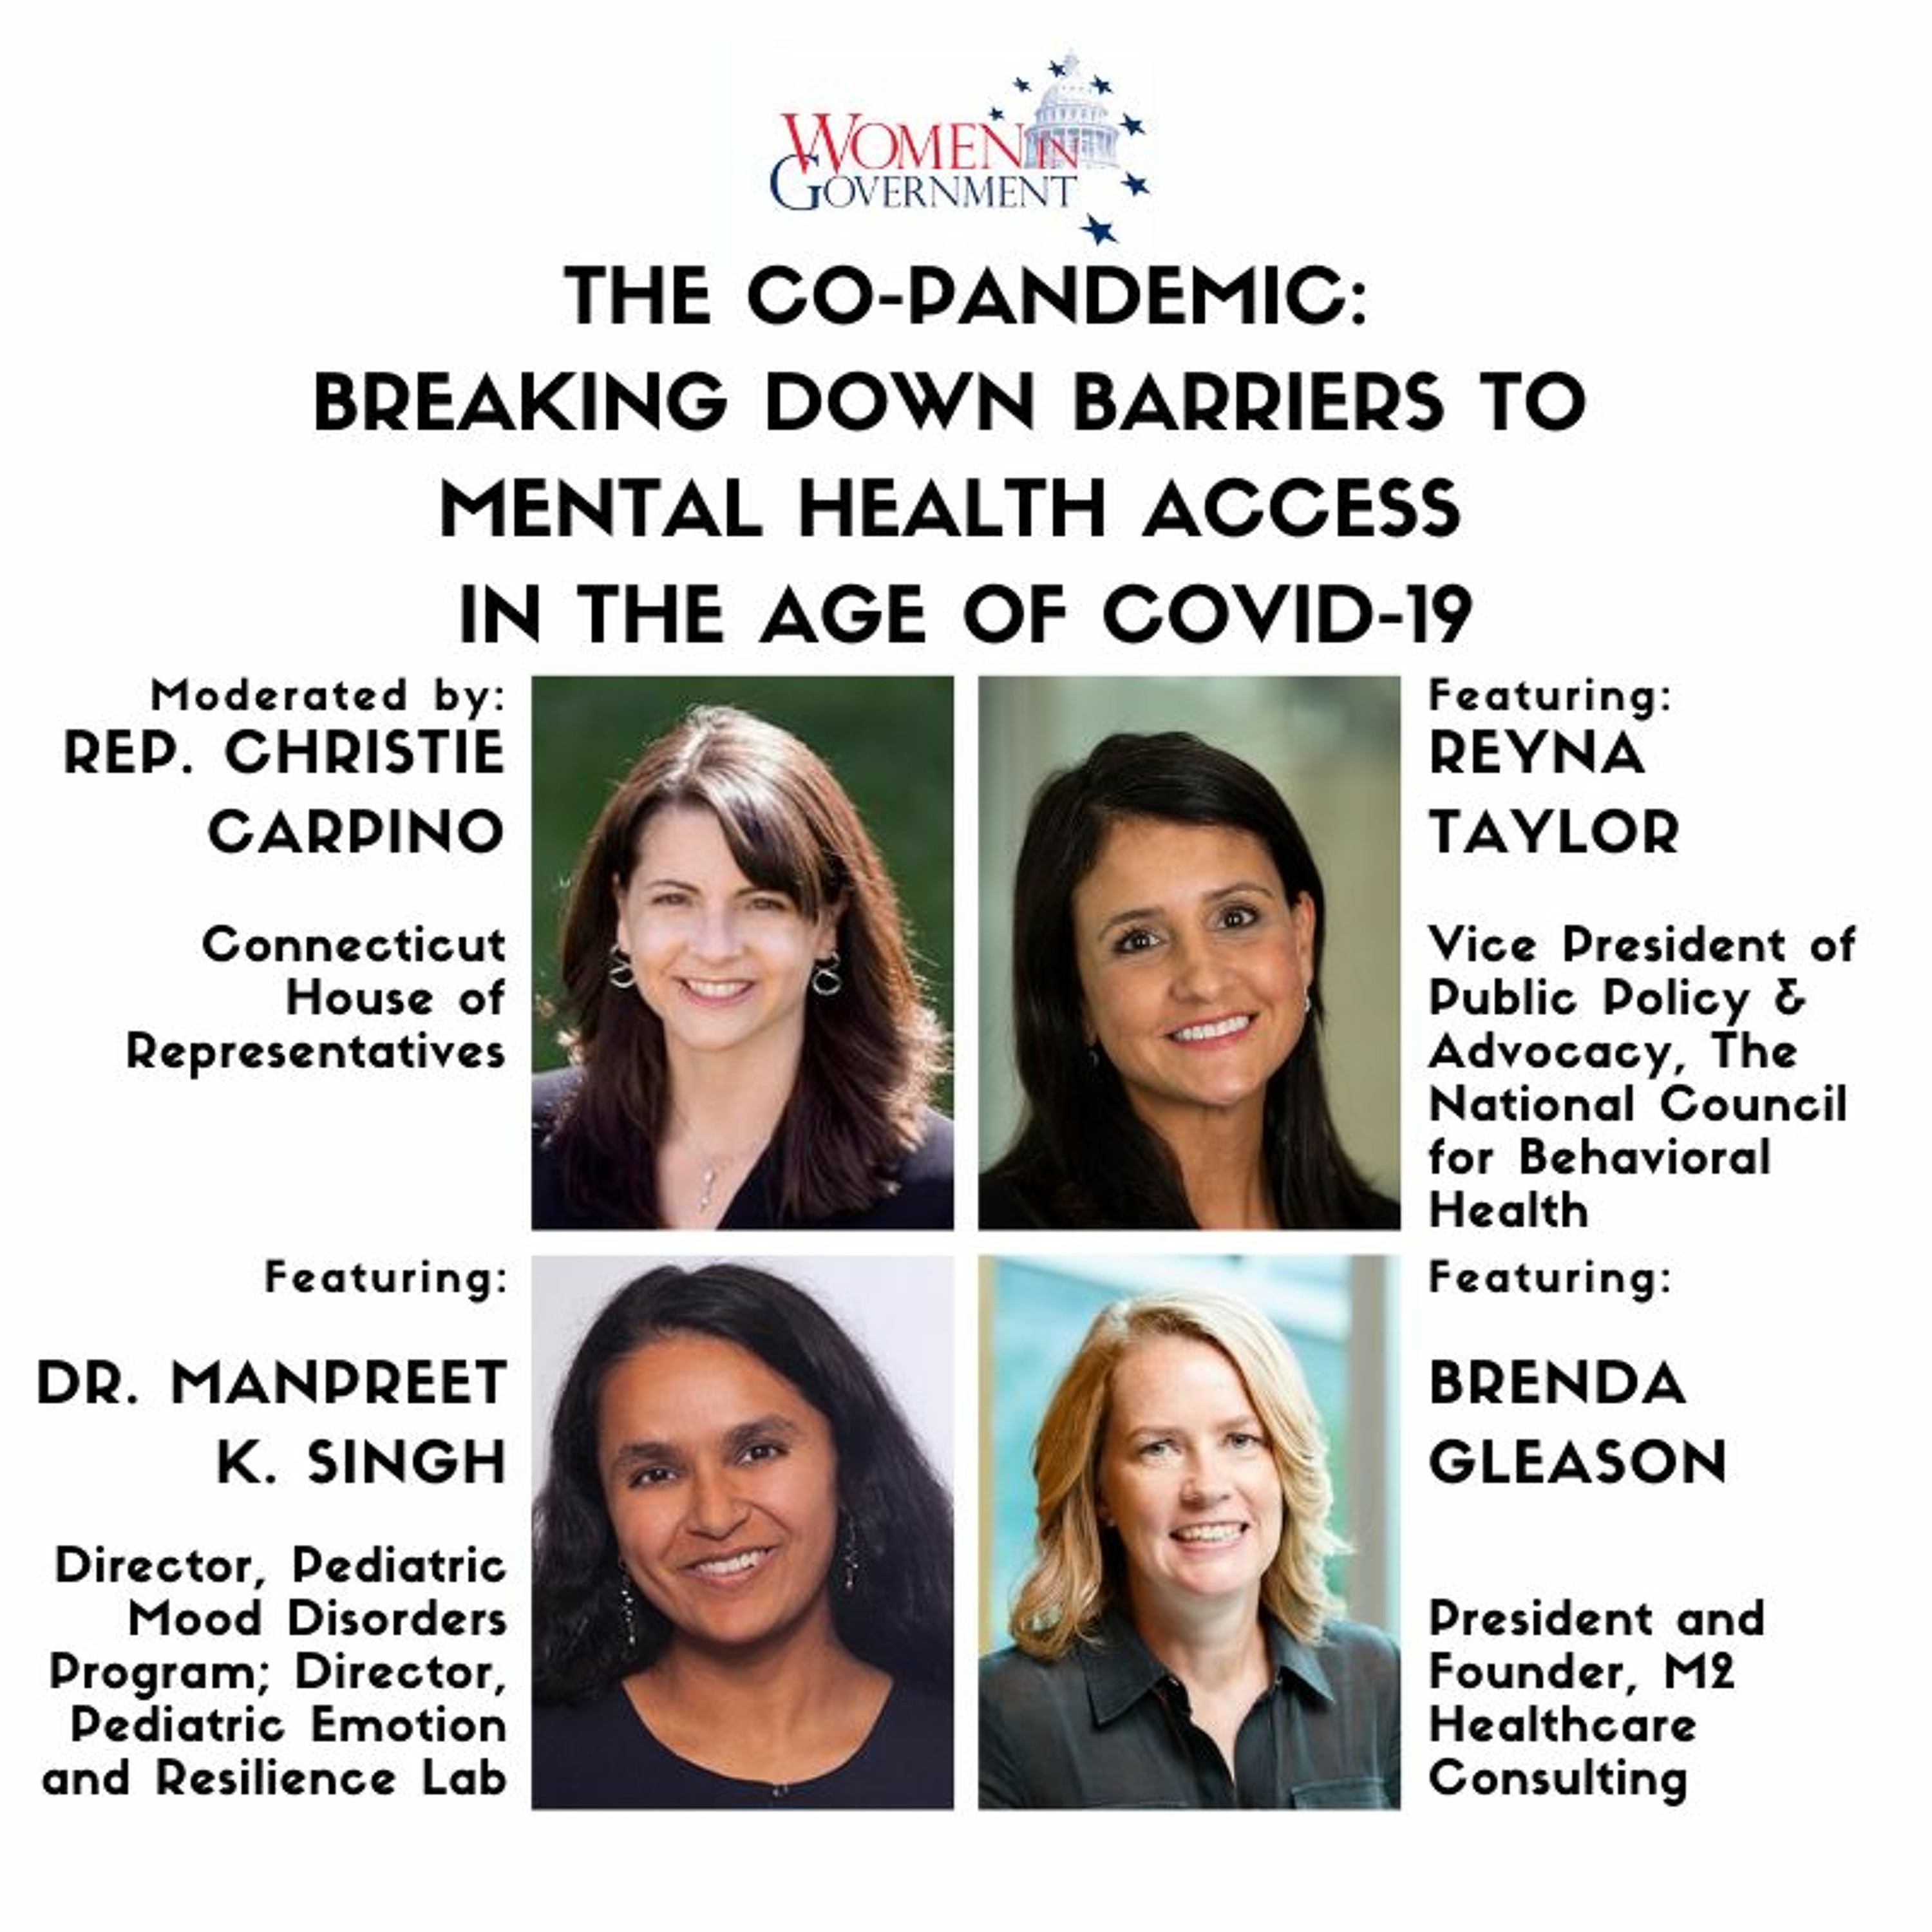 The Co-Pandemic: Breaking Down Barriers to Mental Health Access in the Age of COVID-19